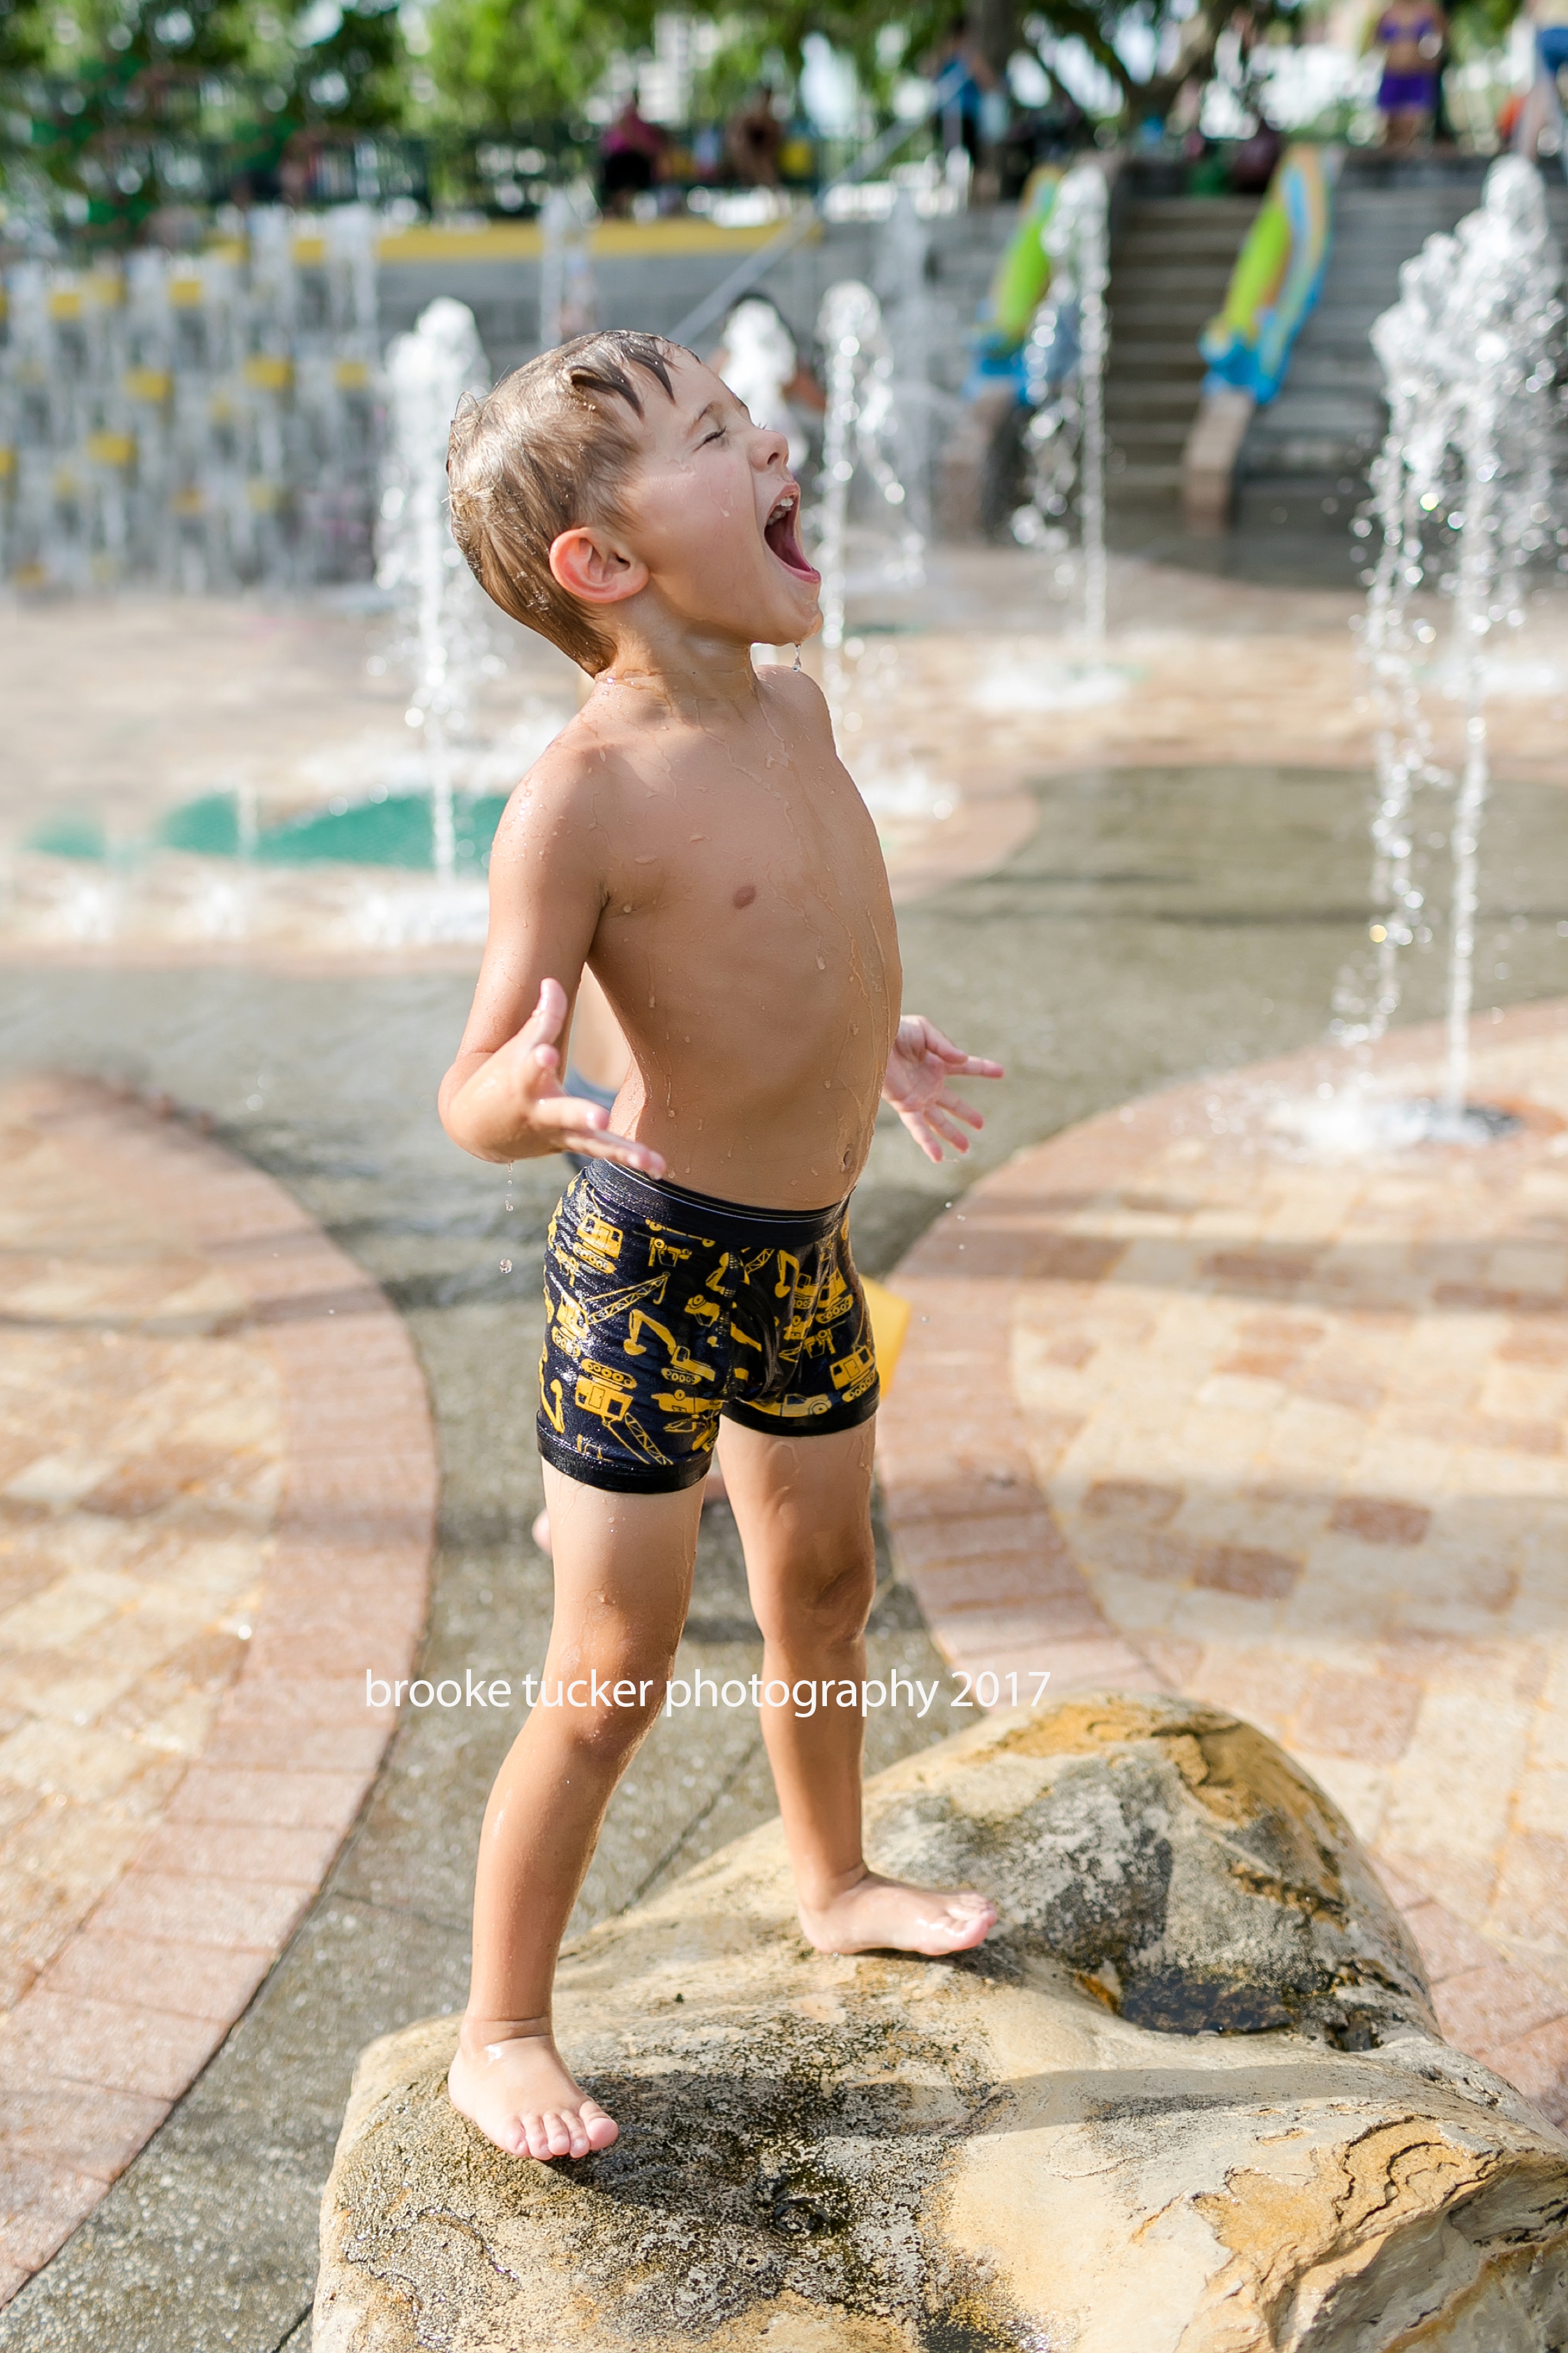 6 things to remember when photographing boys | brooke tucker photography